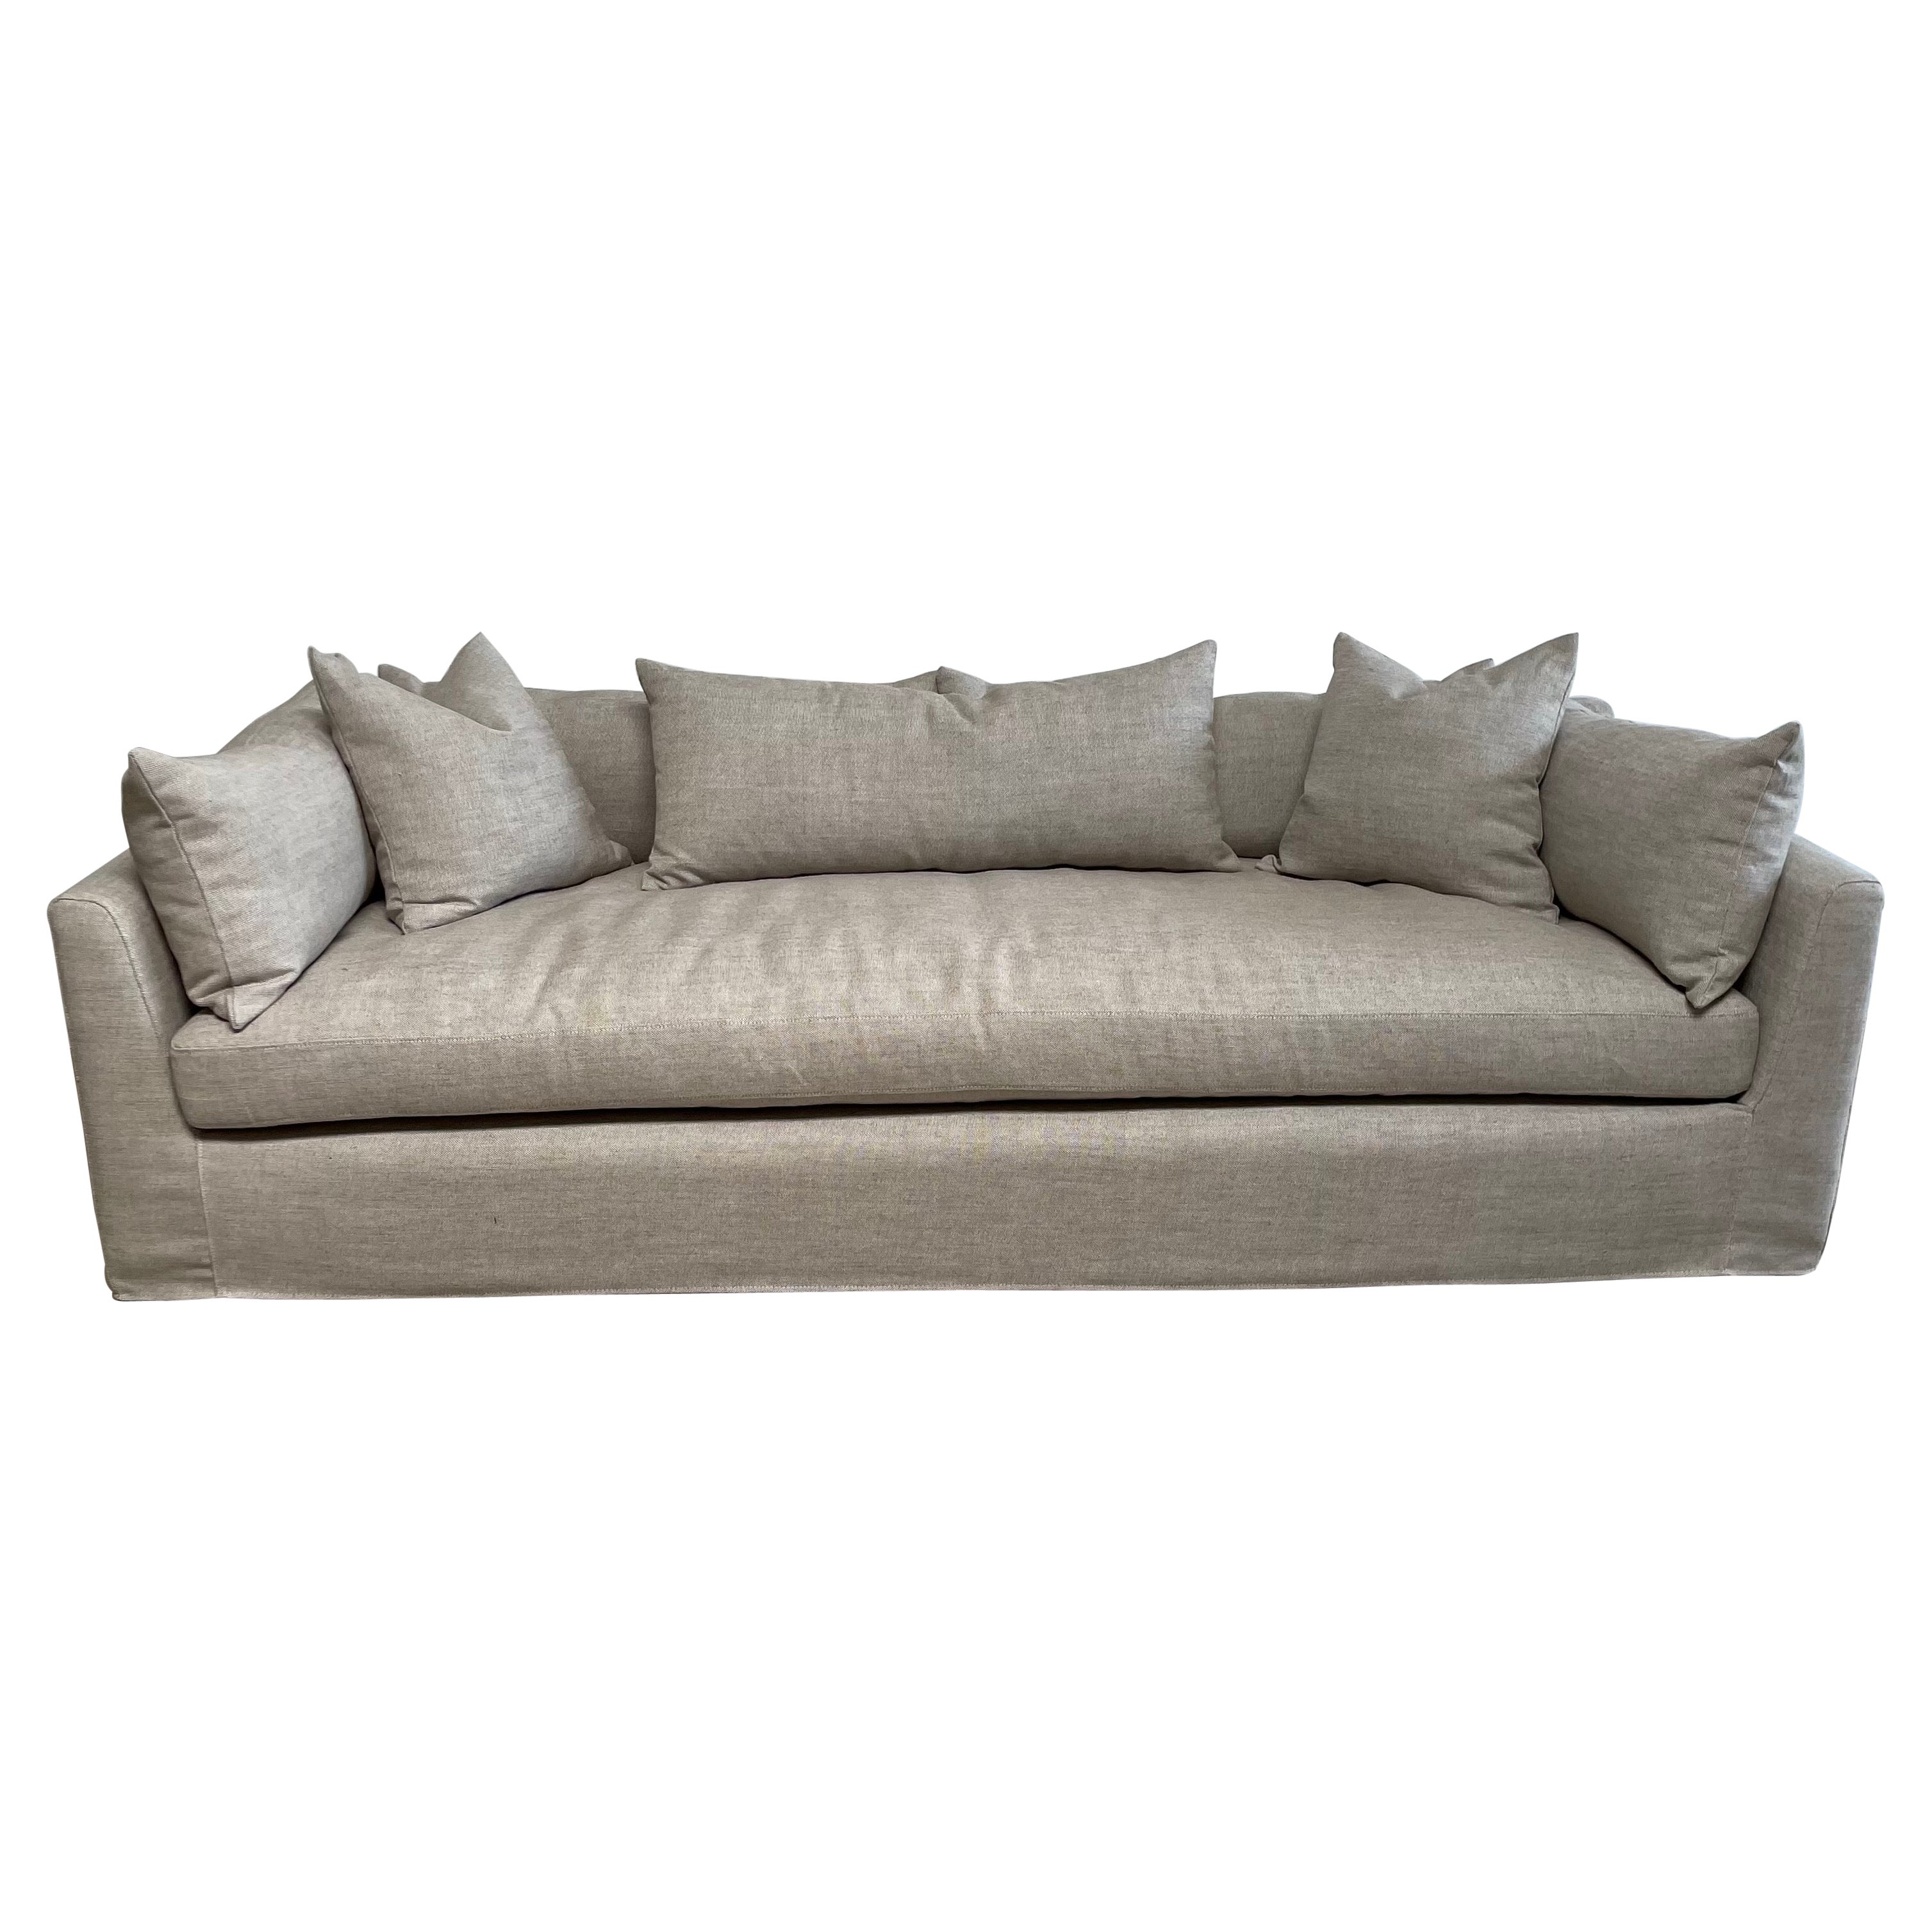 Linen Slip Covered Sofa with Down Cushions 